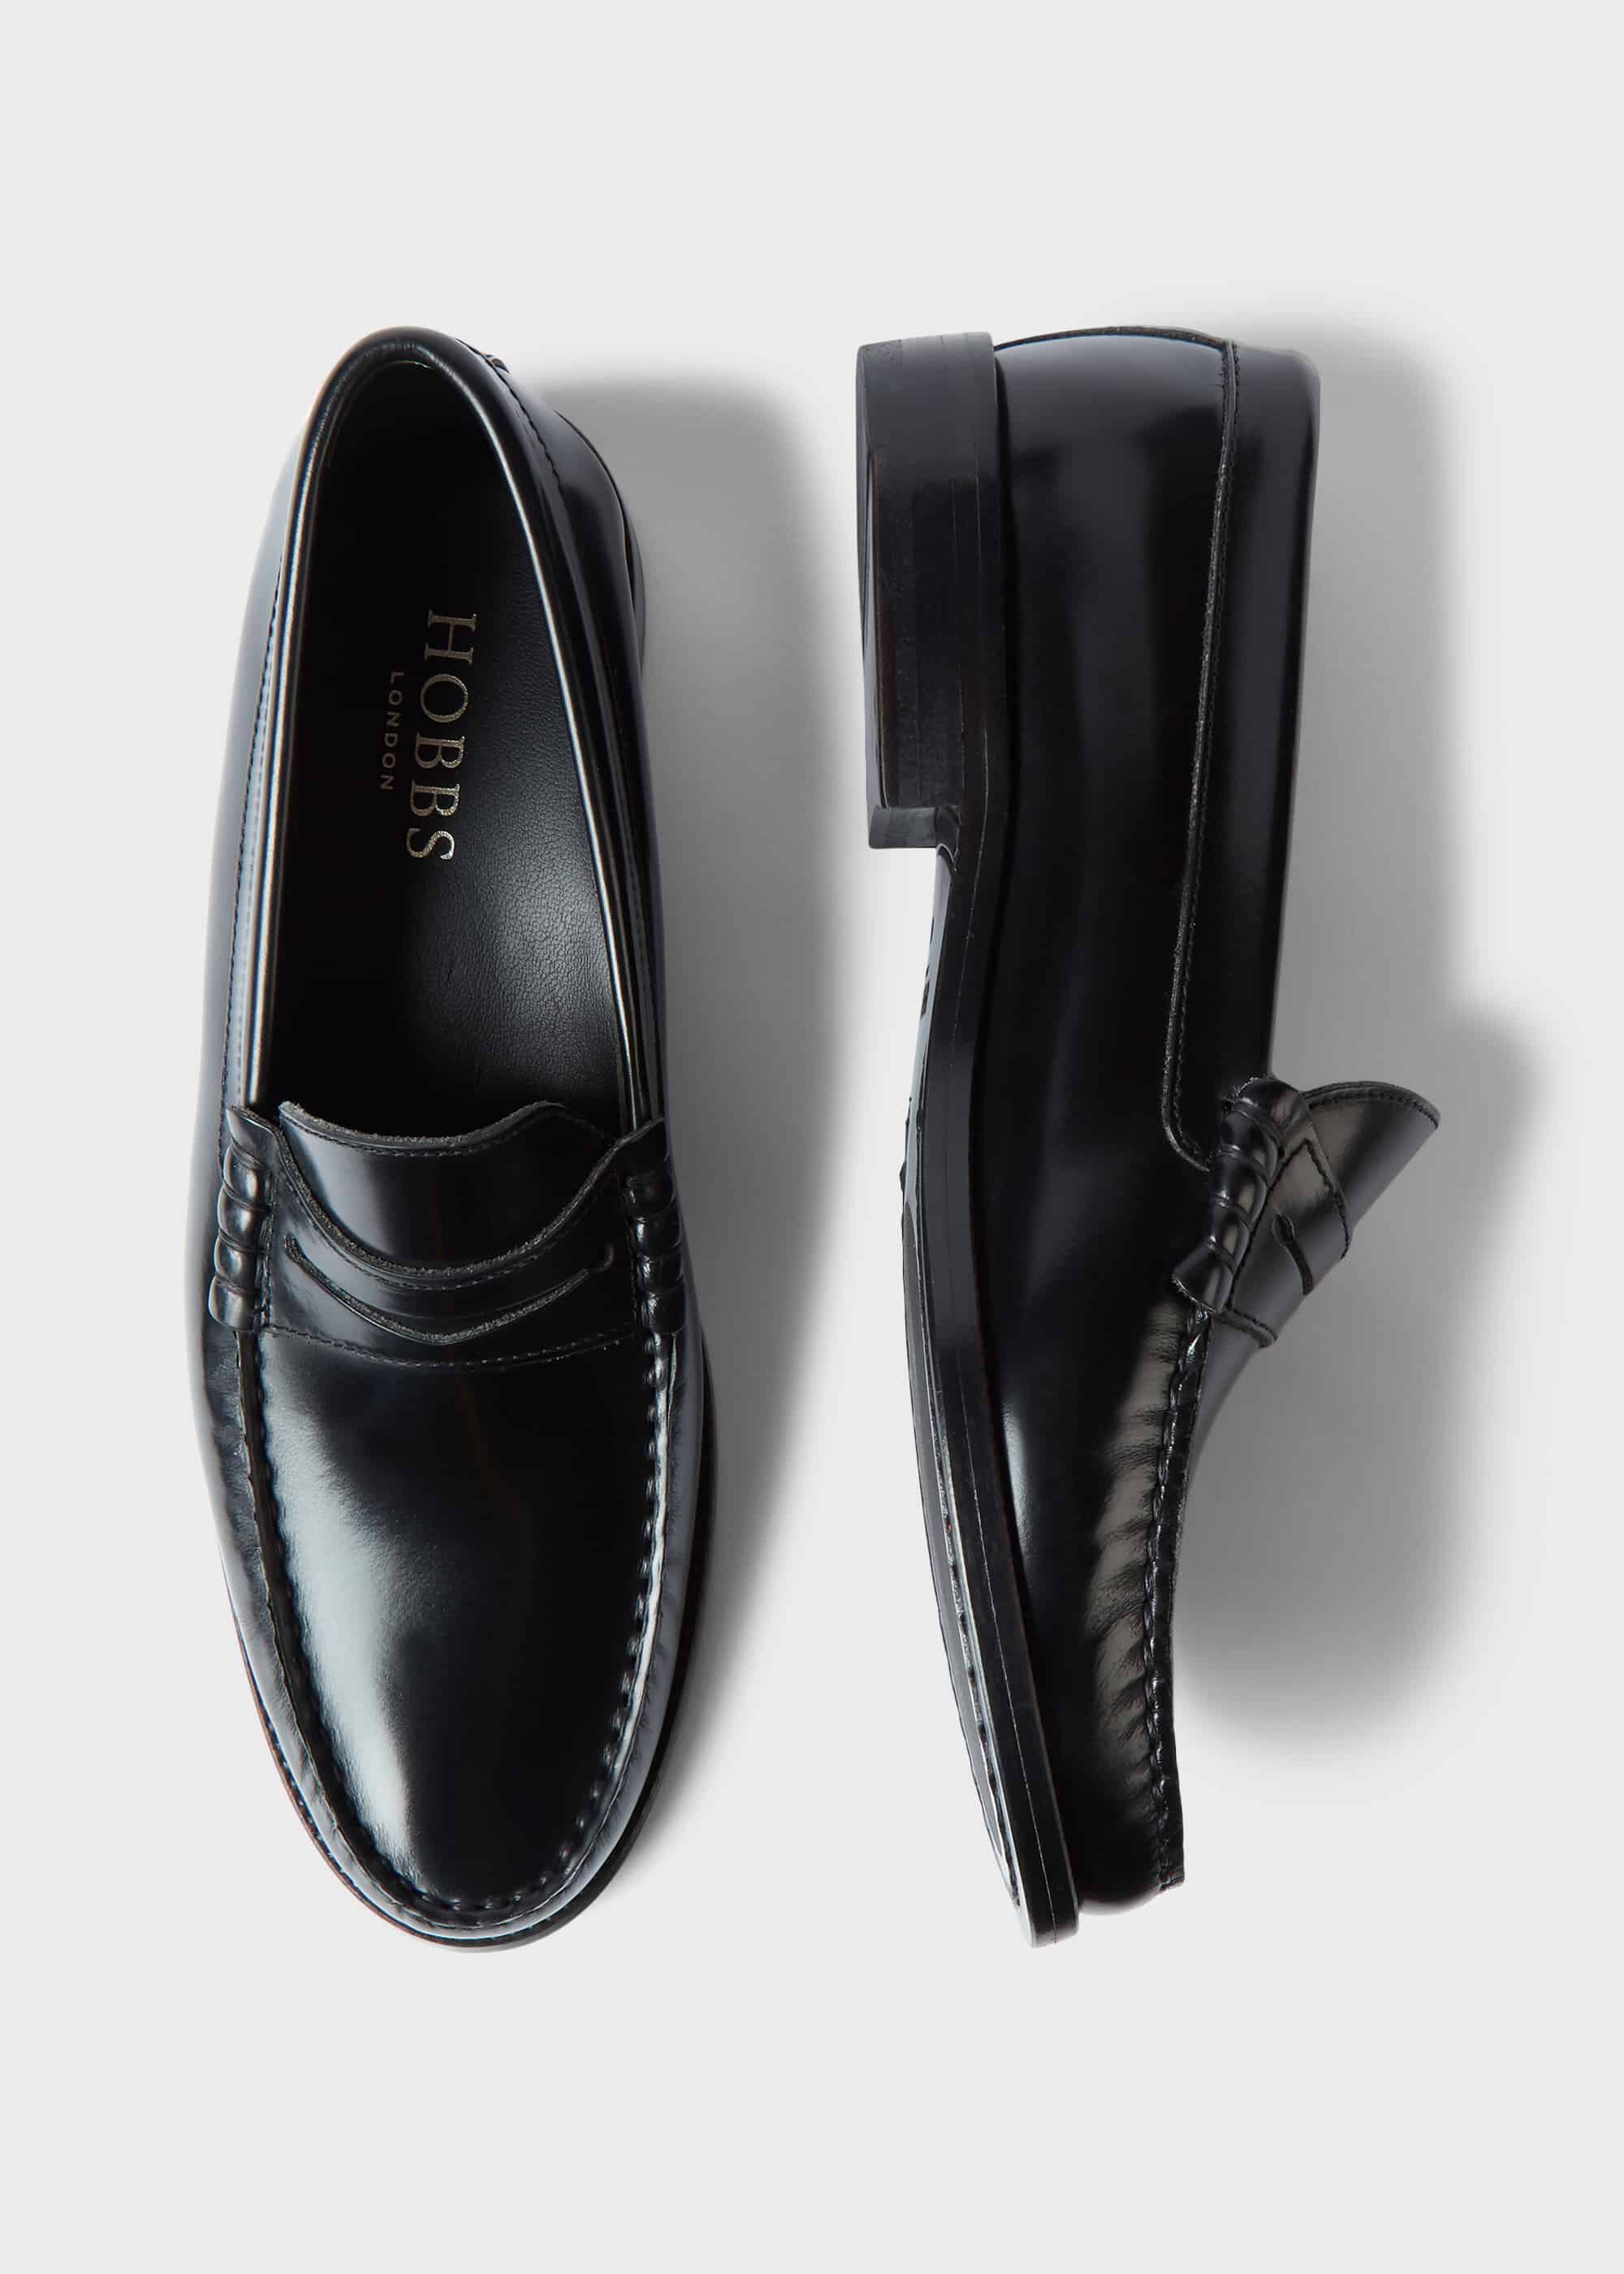 hobbs loafers